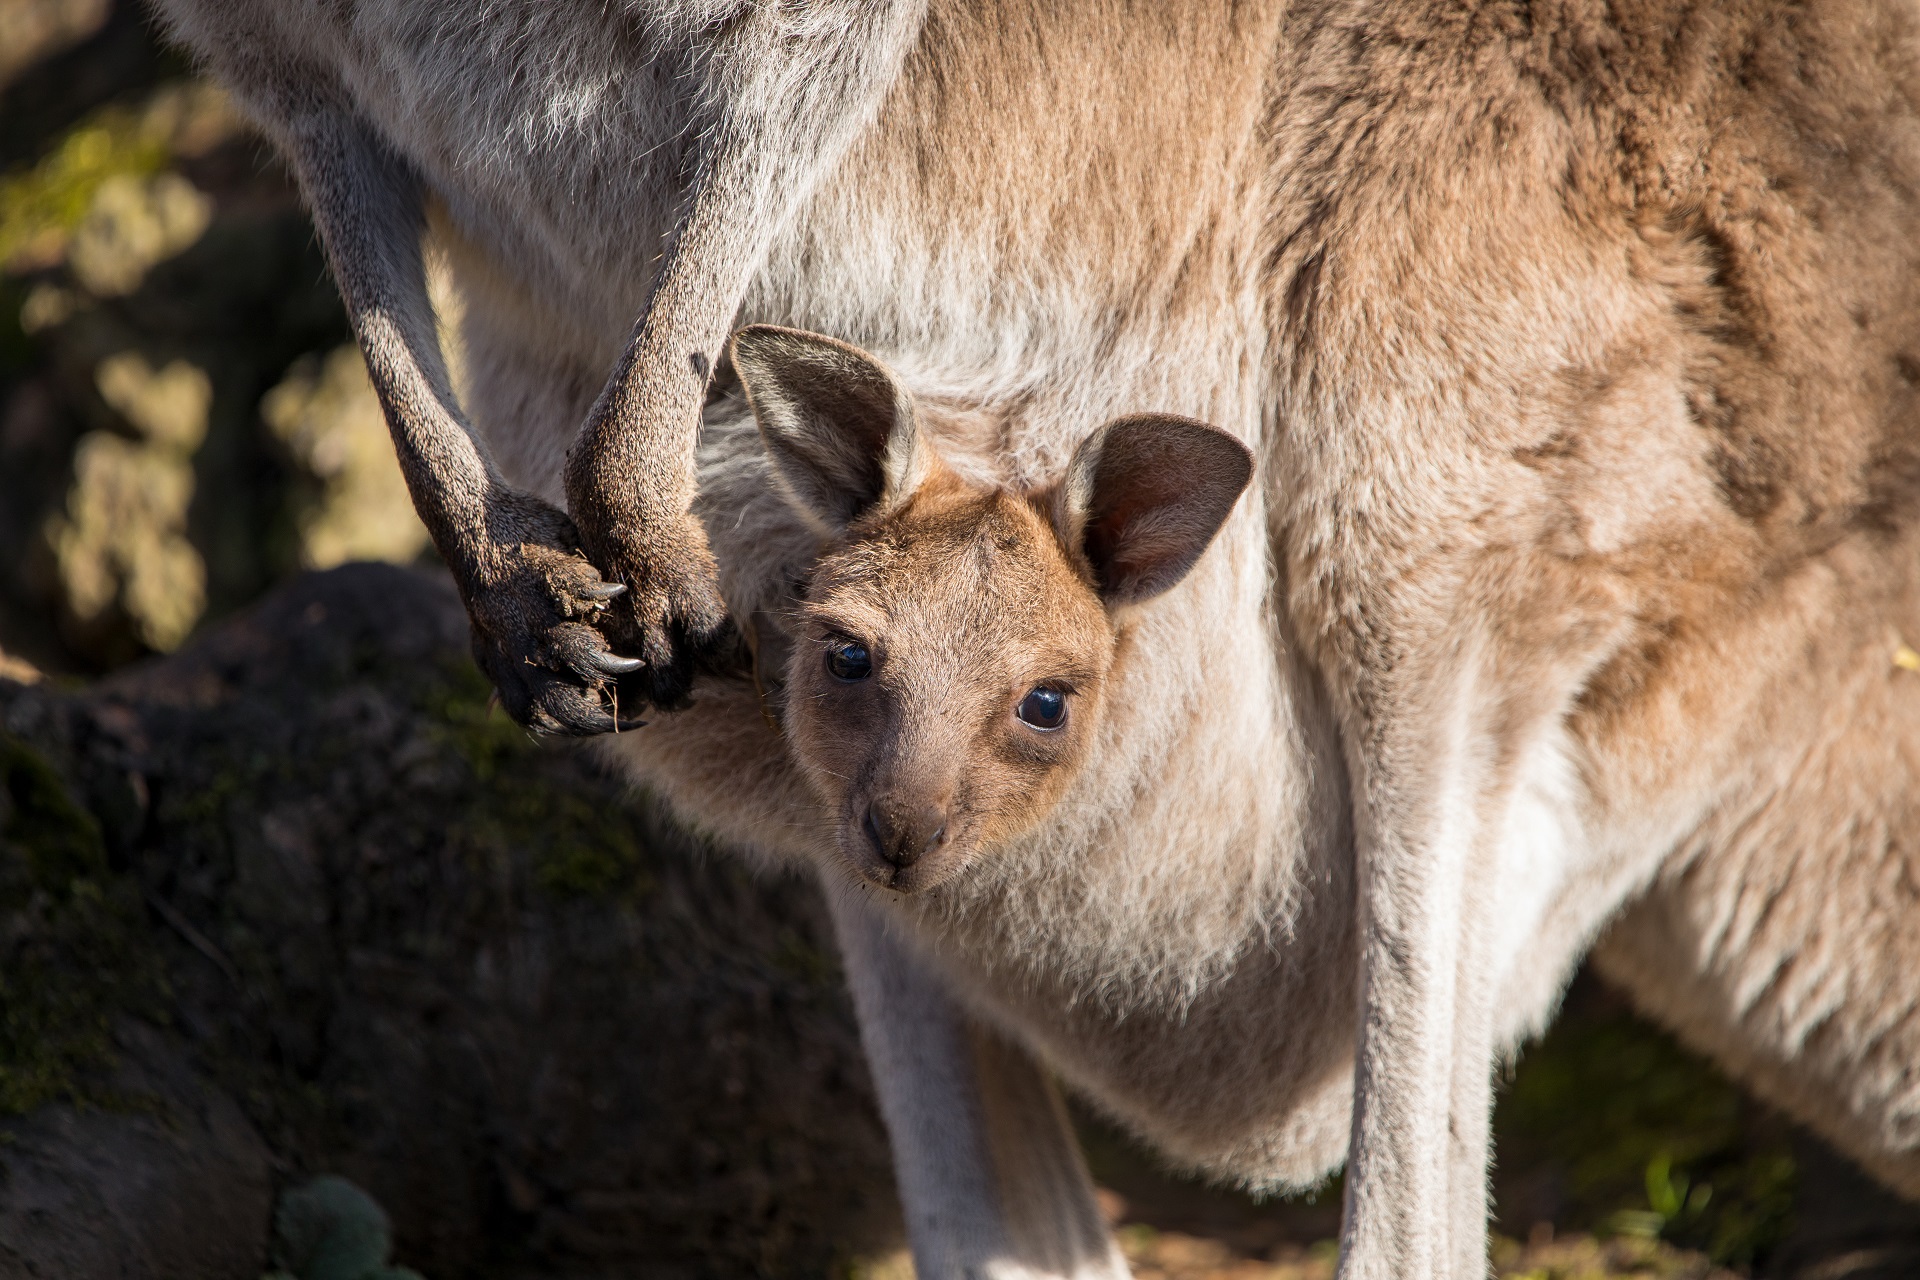 Kangaroo joey poking out mother's pouch

IMAGE: Sian Addison 2018